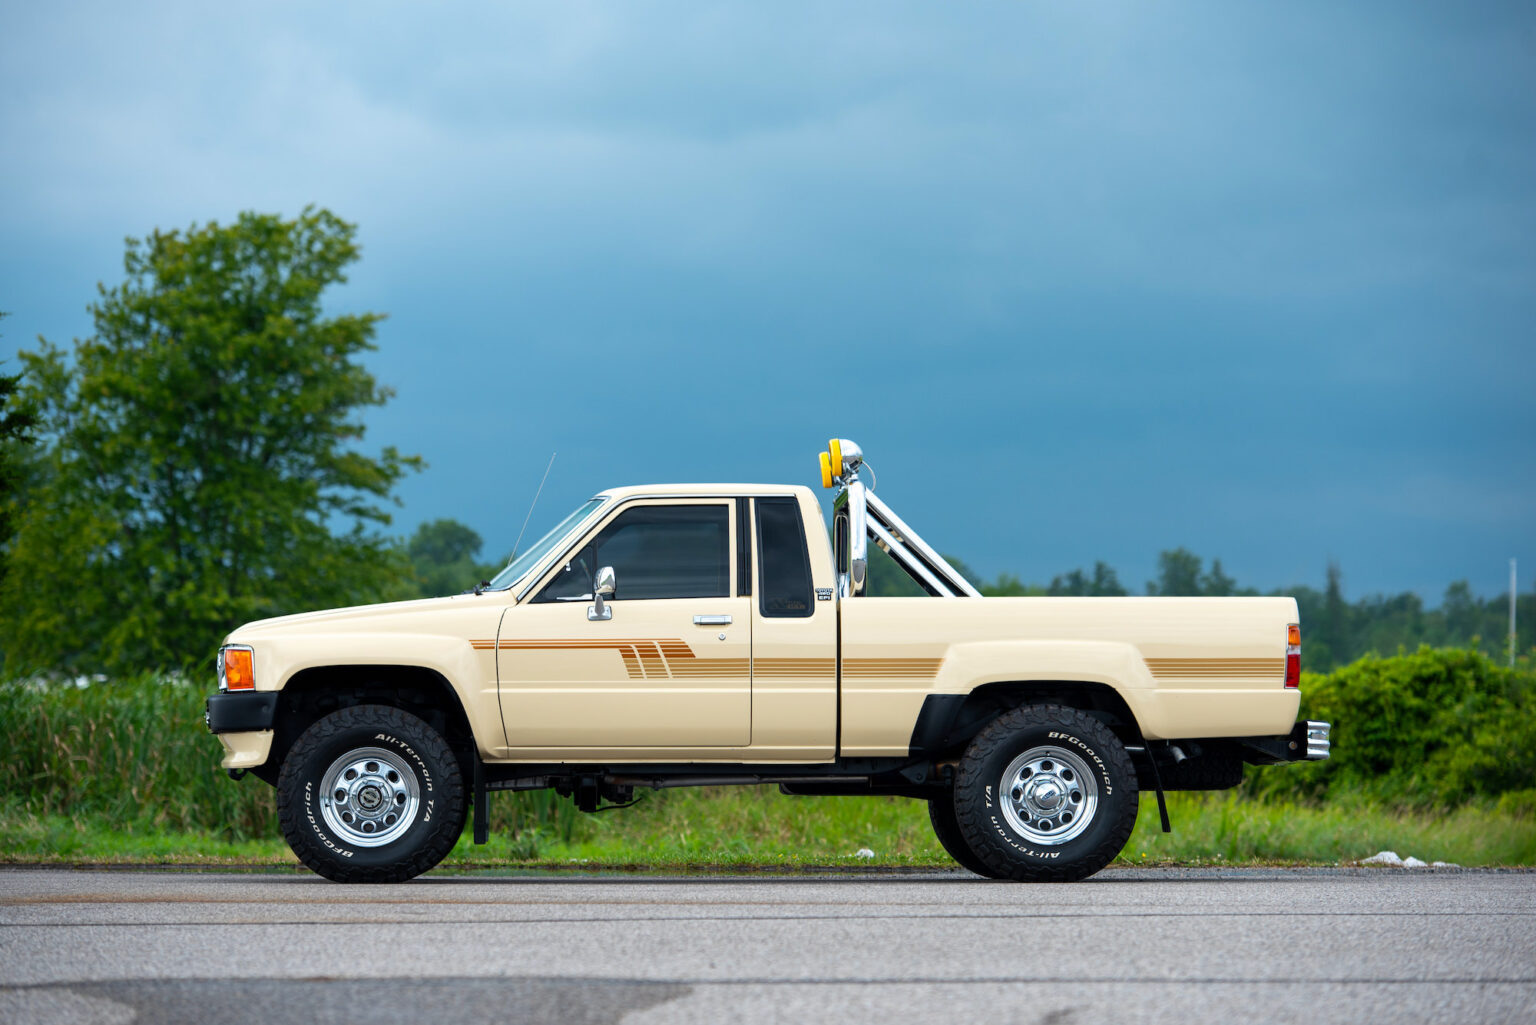 1986 Toyota Hilux 4X4 similar to the one Marty McFly Drove in Back to the Future